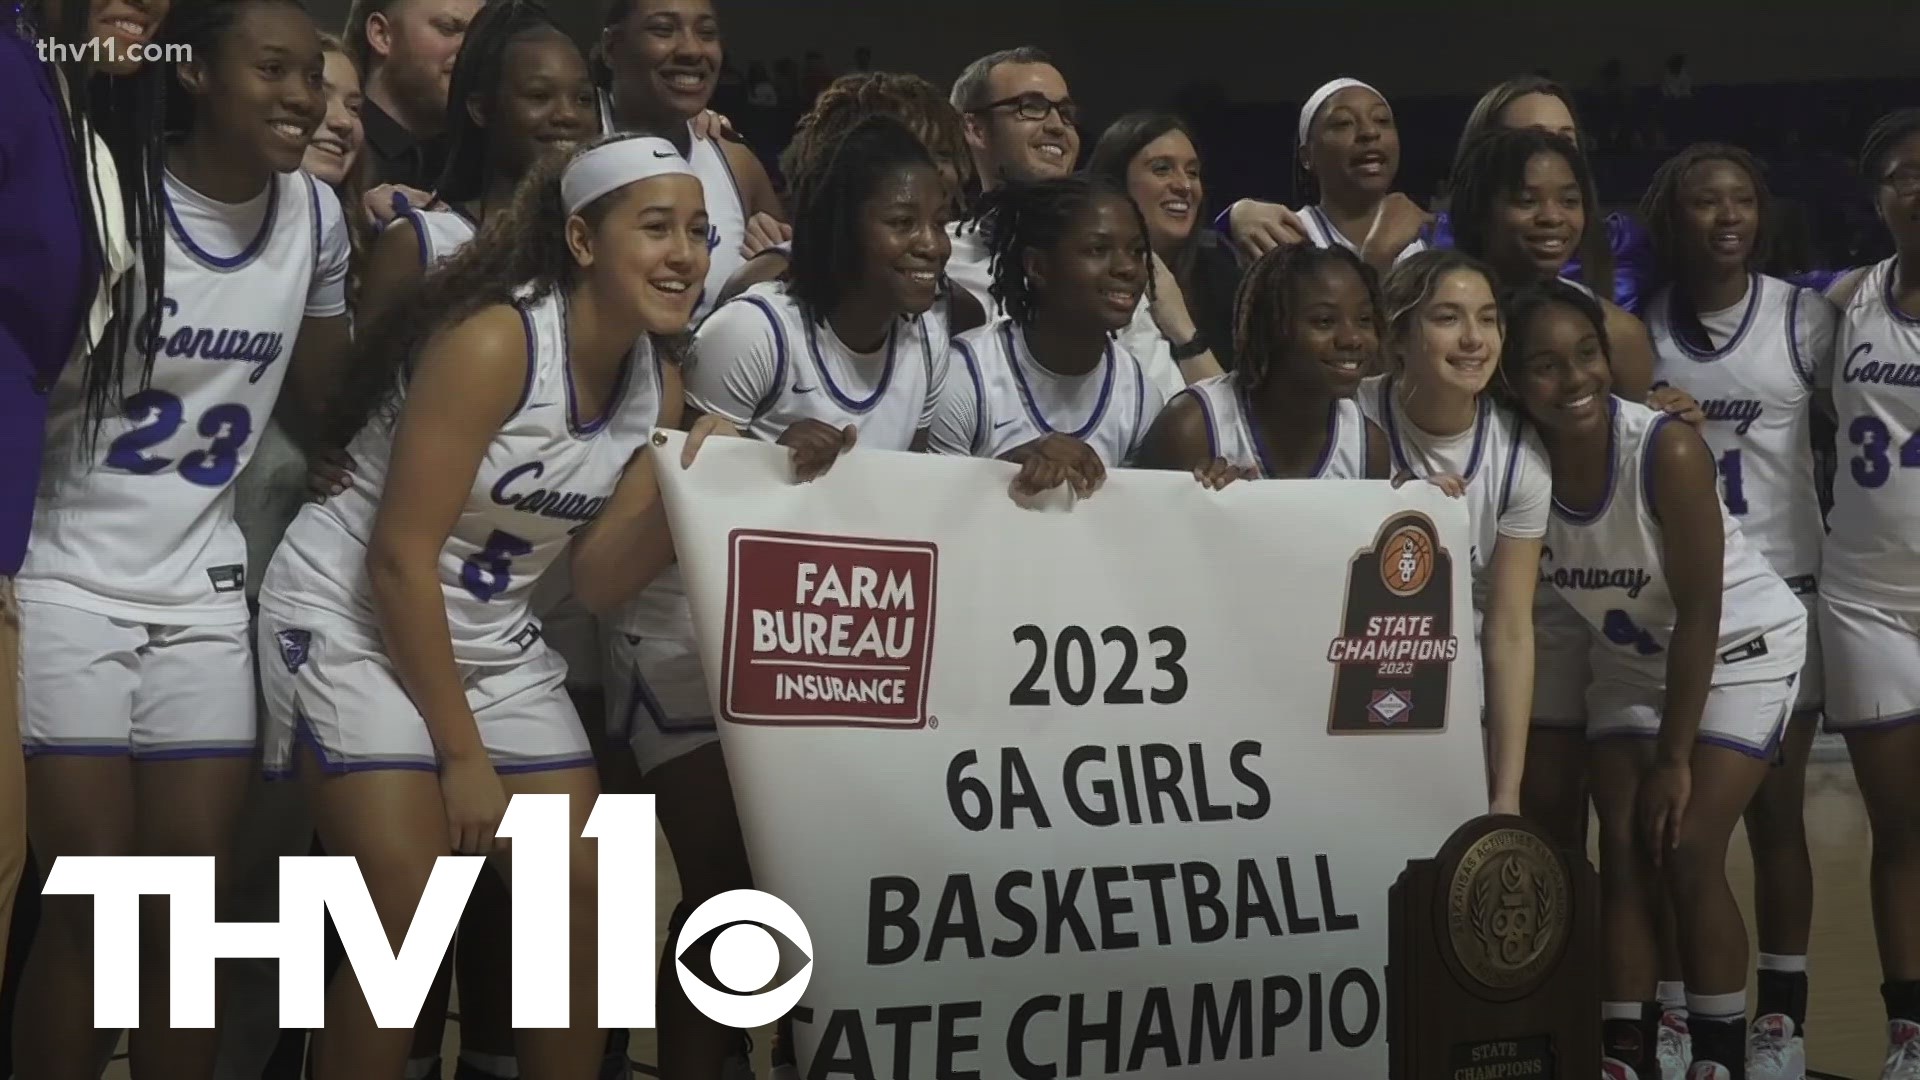 The Wampus Cats defeated North Little Rock 62-53 to claim the Class 6A girls state basketball championship in Hot Springs.